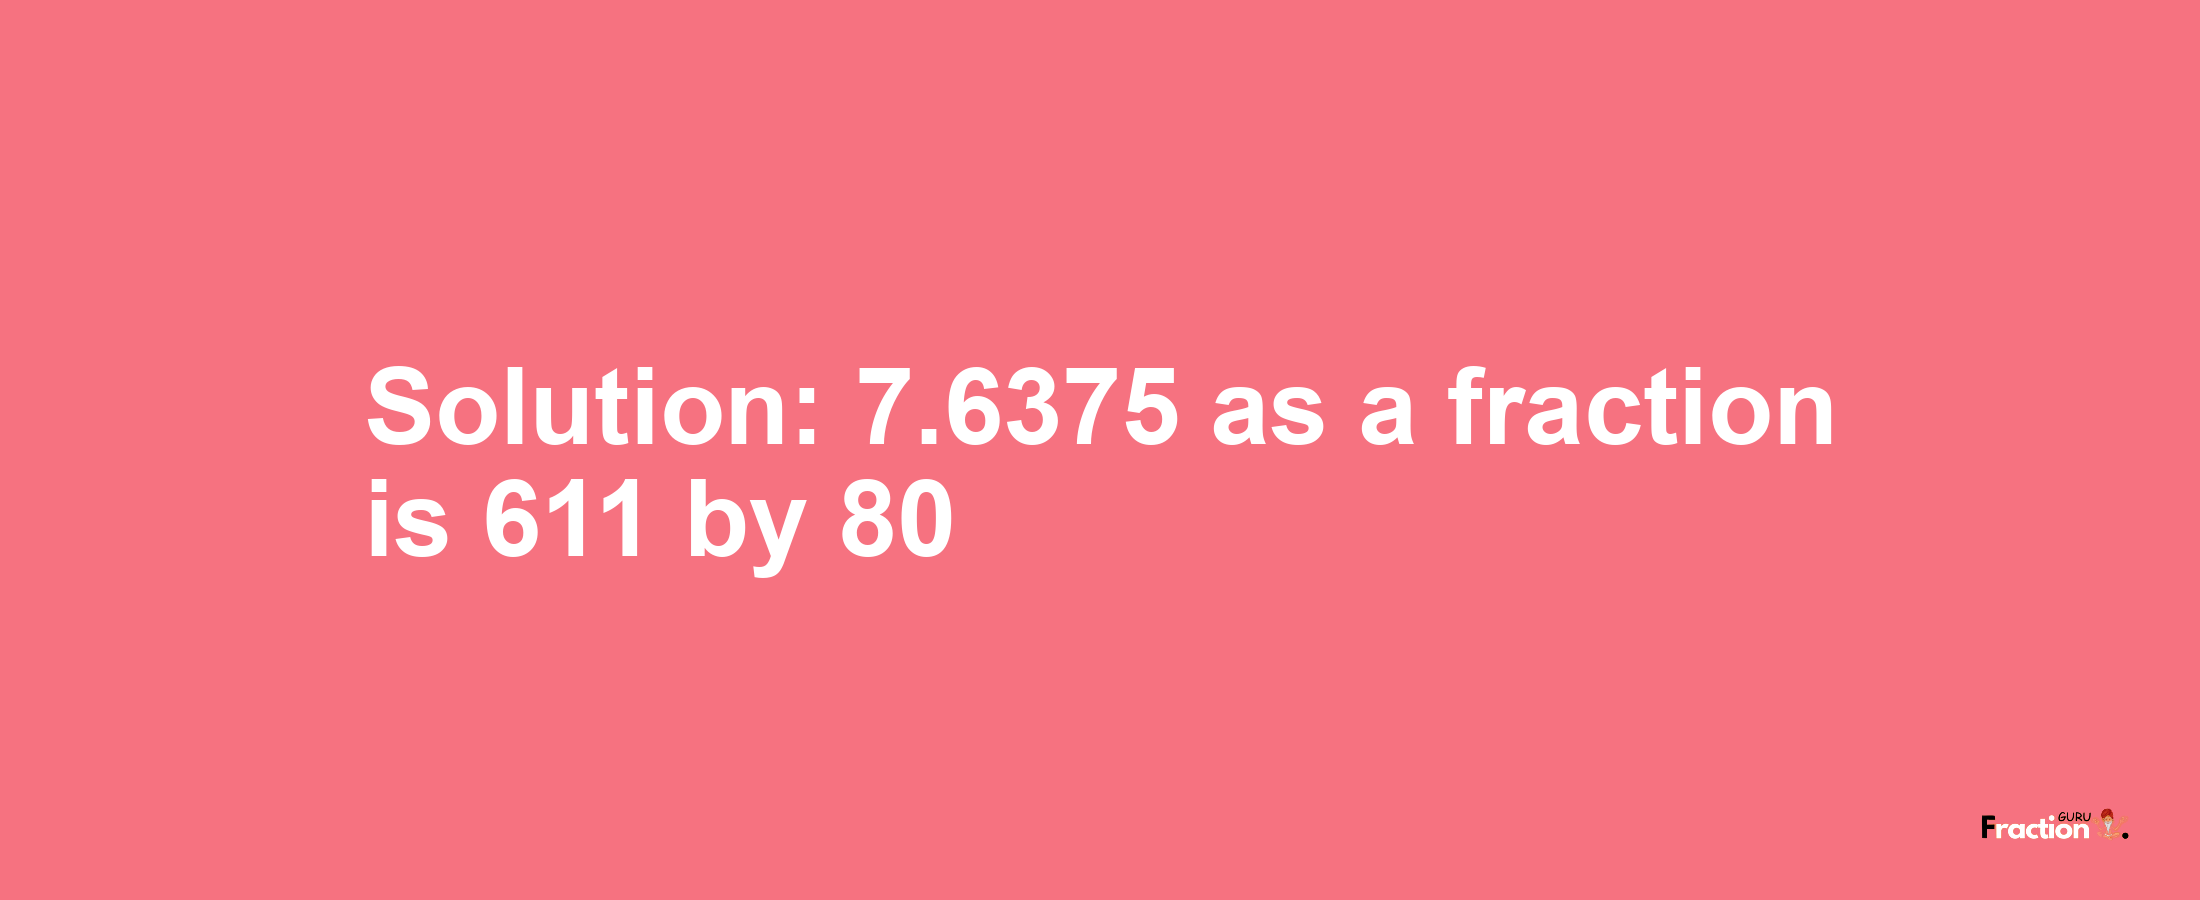 Solution:7.6375 as a fraction is 611/80